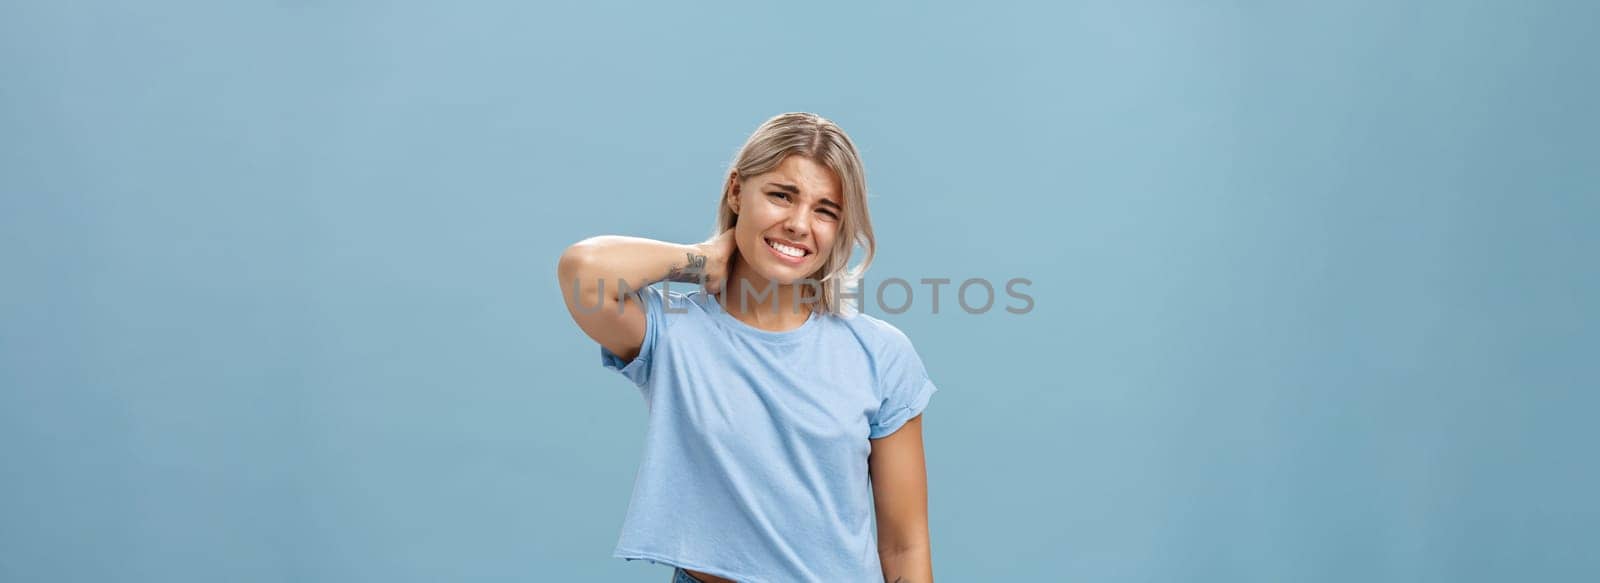 Lifestyle. Girl unwilling to go with friend feeling awkward and unsure how say no frowning and clenching teeth making apologizing face rubbing neck behind saying sorry while rejecting offer over blue background.